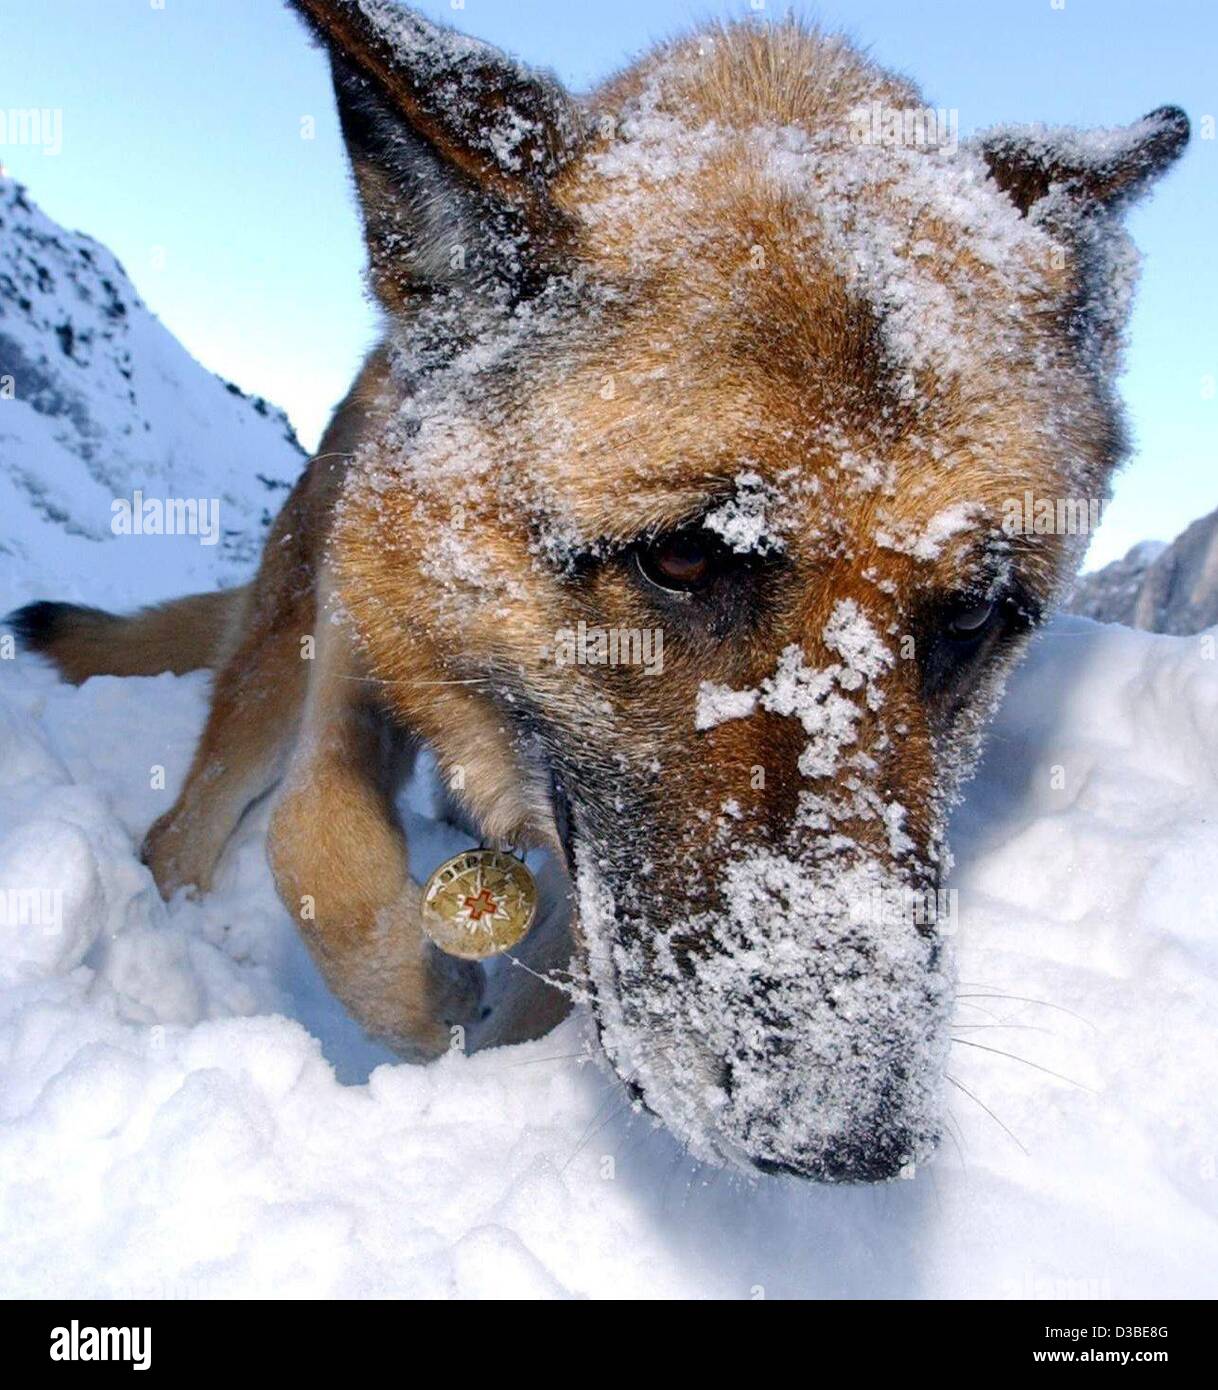 (dpa) - A tracking dog sniffs around in the snow near Garmisch-Partenkirchen in southern Germany, 15 January 2003.  The German shepherd belongs to the Bavarian mountain rescue service's avalanche and rescue K-9 unit. Stock Photo